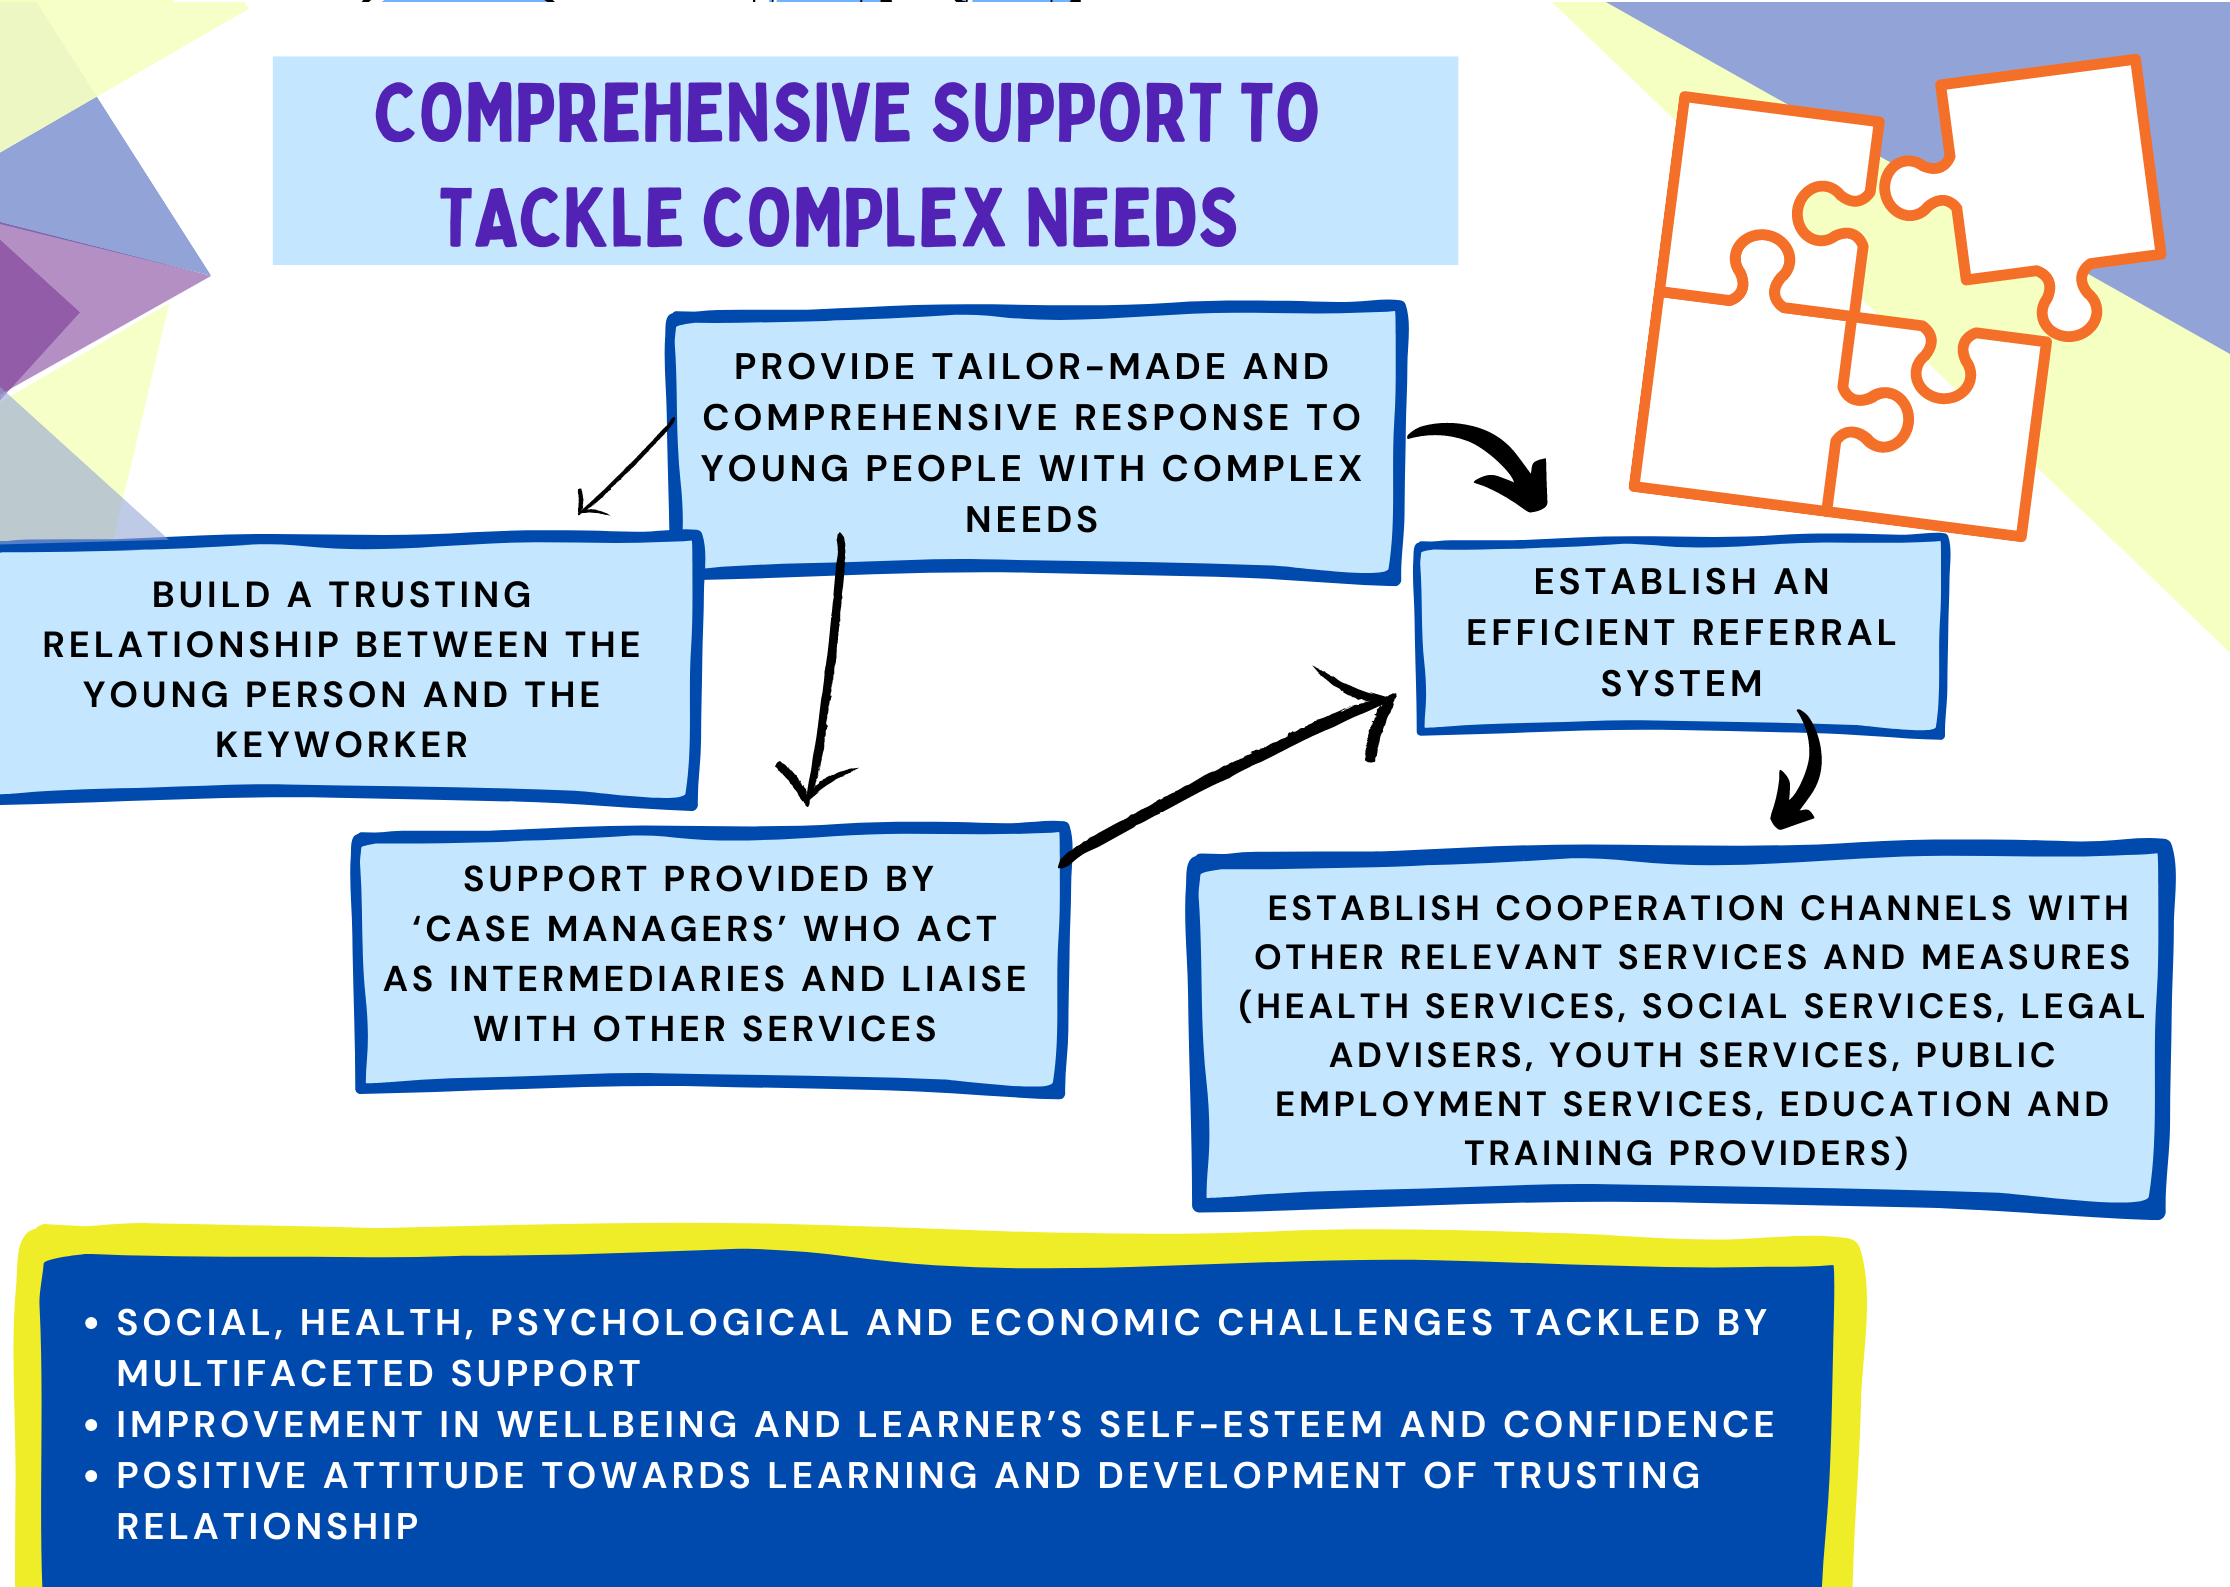 05_comprehensive support to tackle complex needs